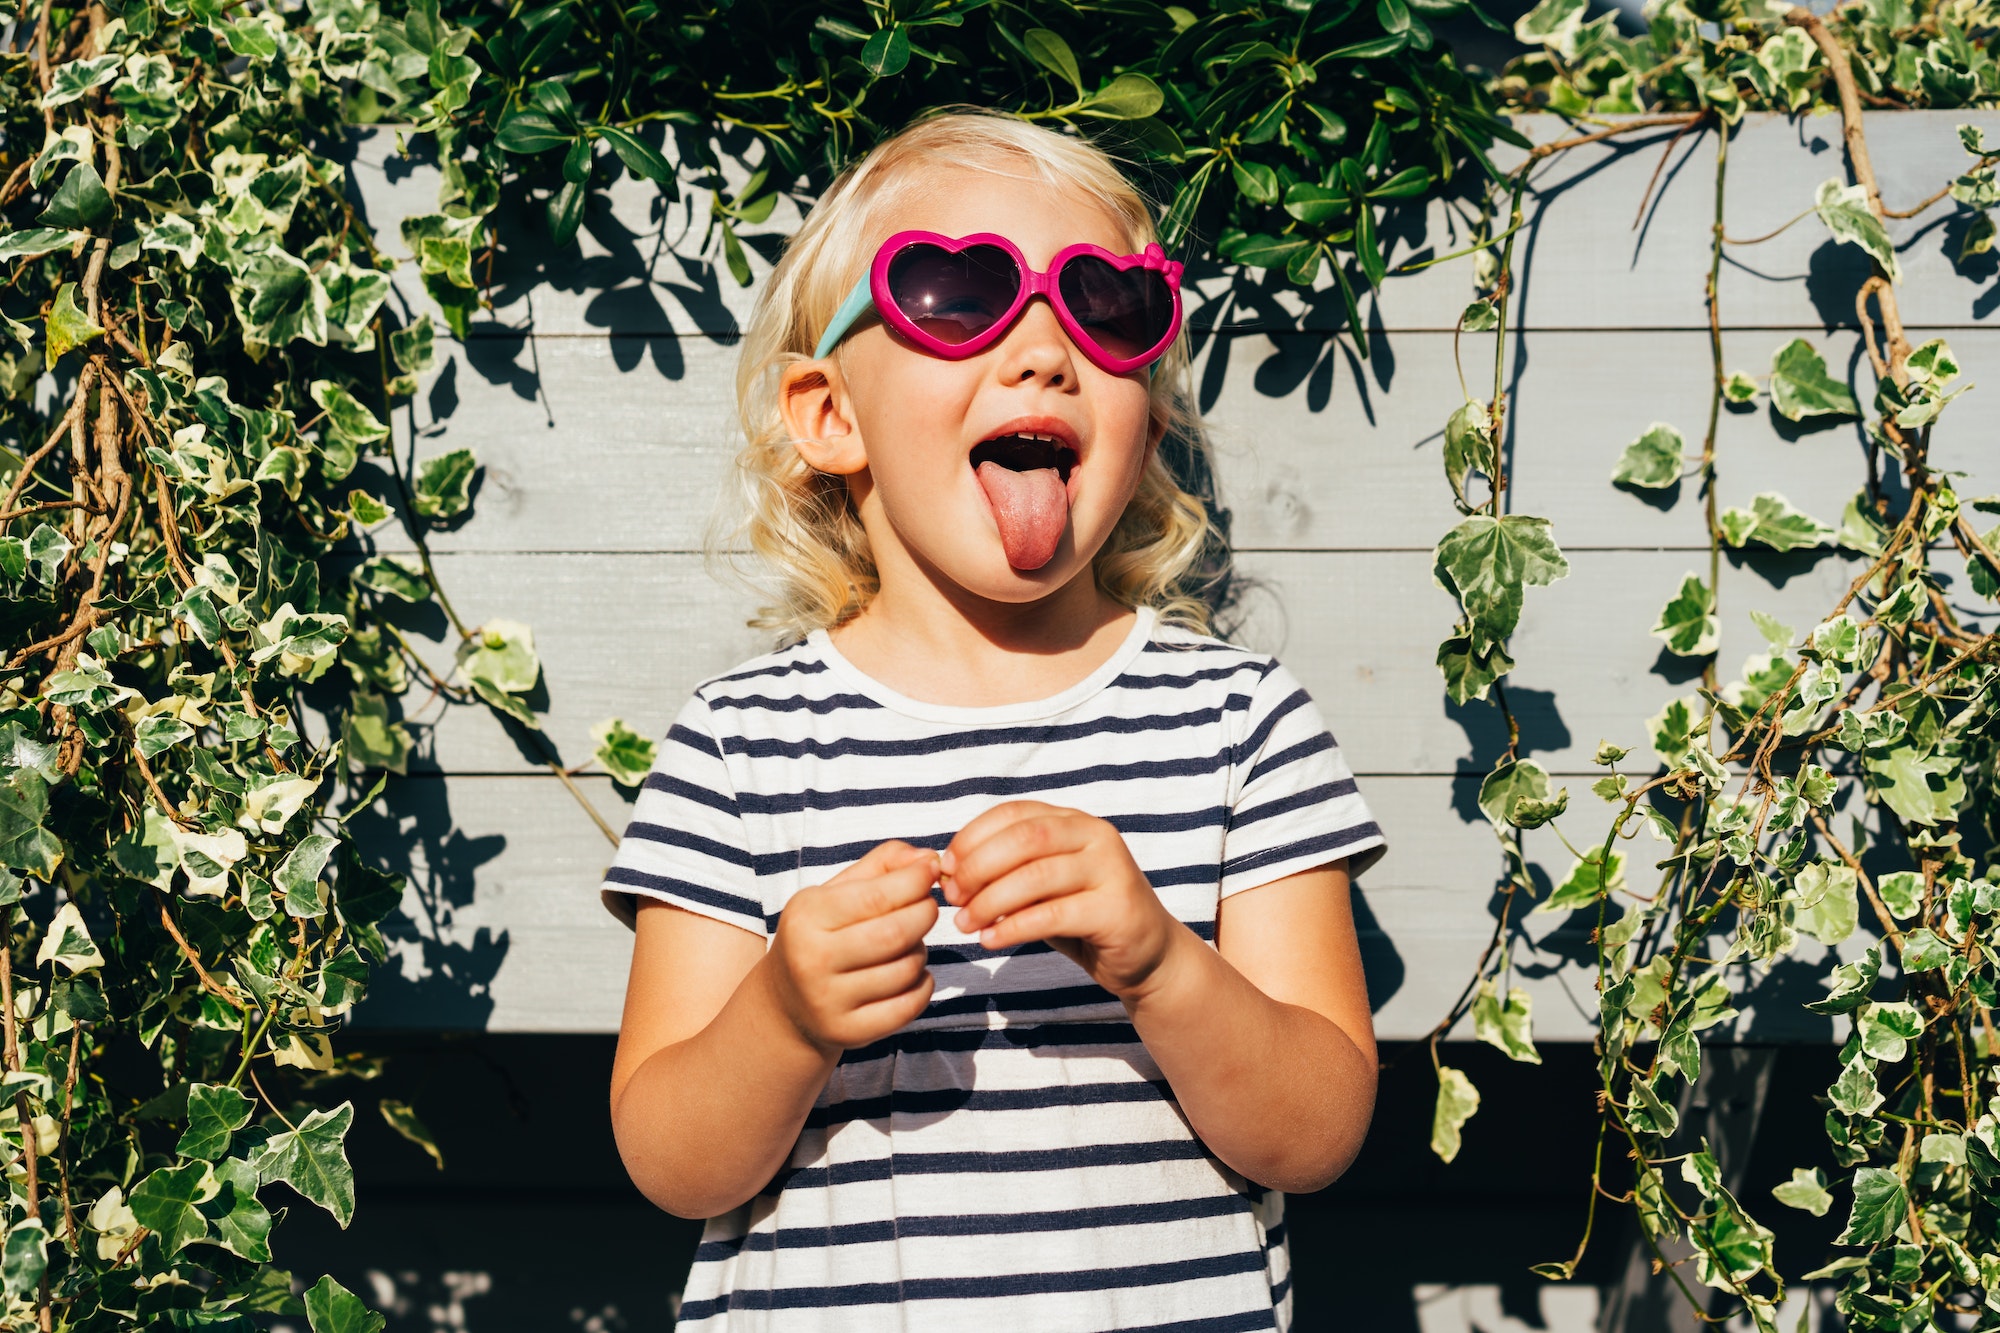 Happy carefree emotional child in summer sunglasses shows tongue and grimaces.